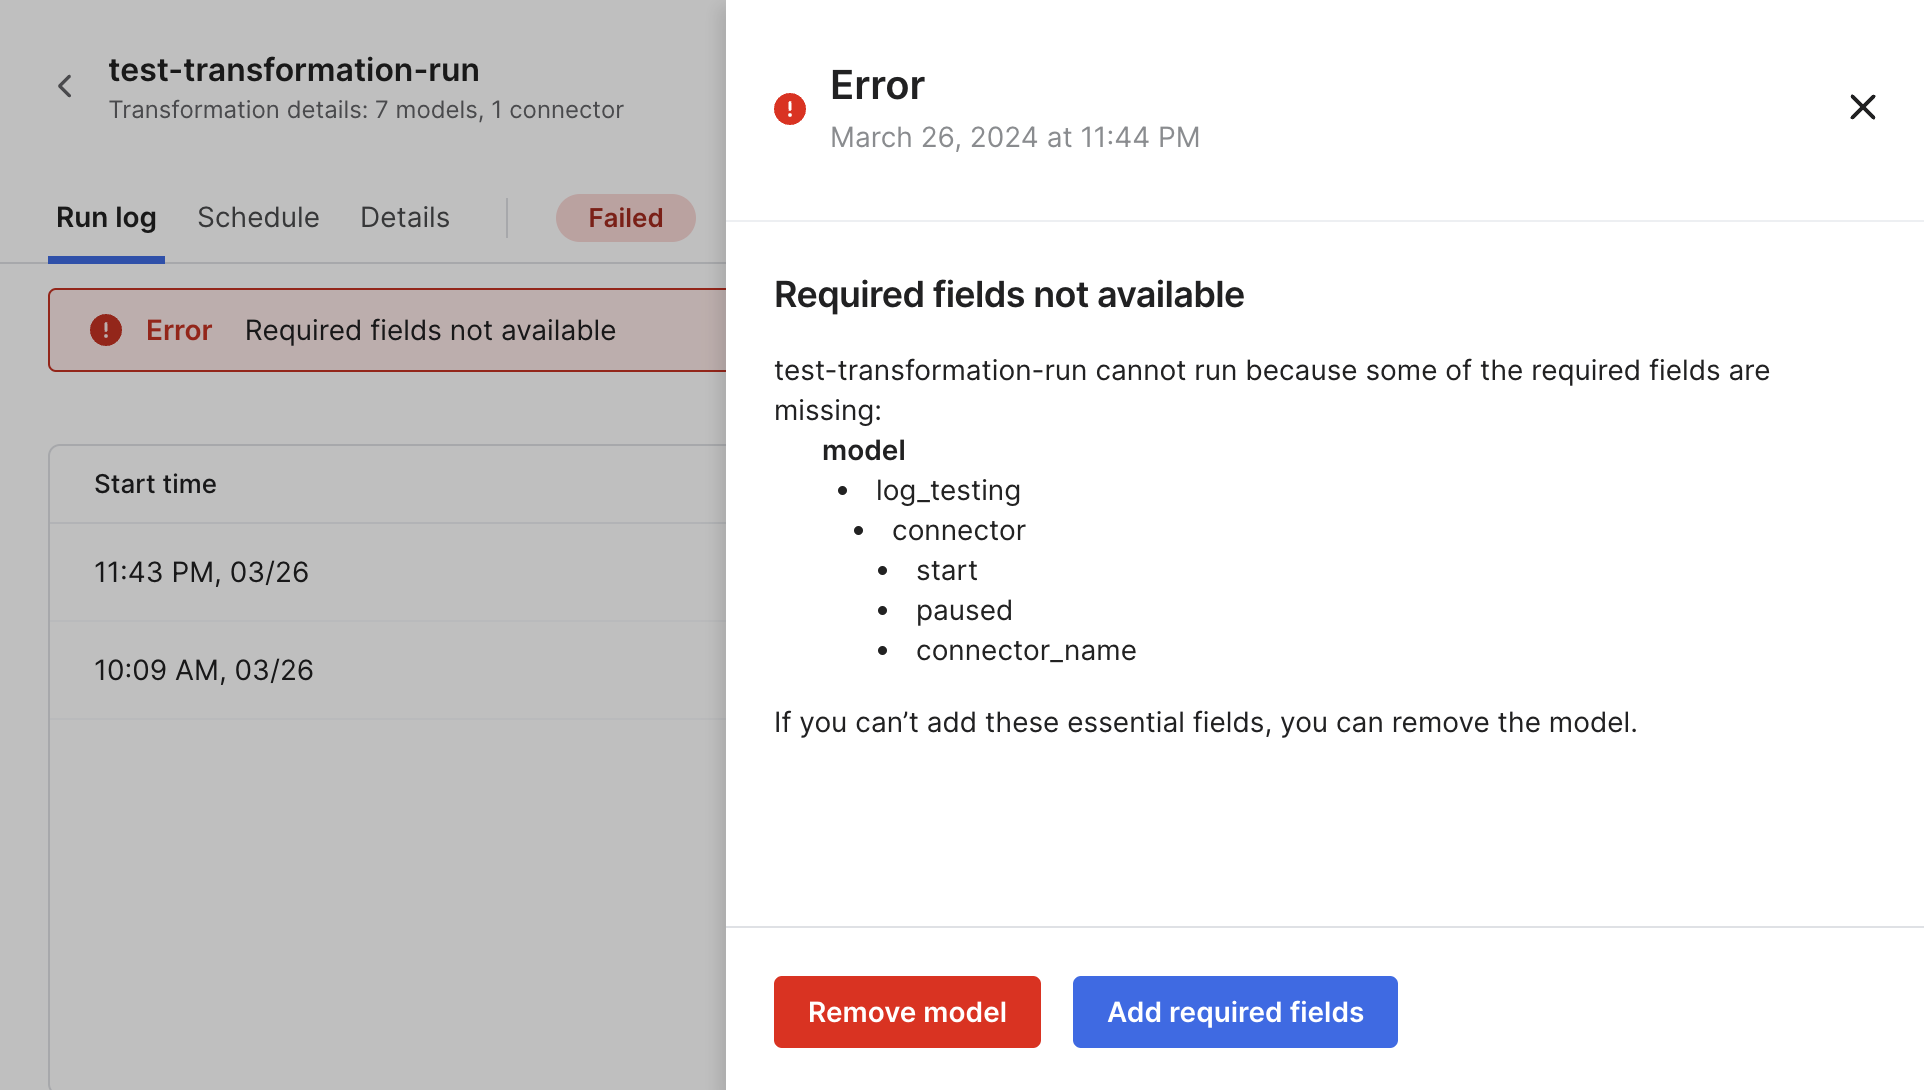 Required fields not available error